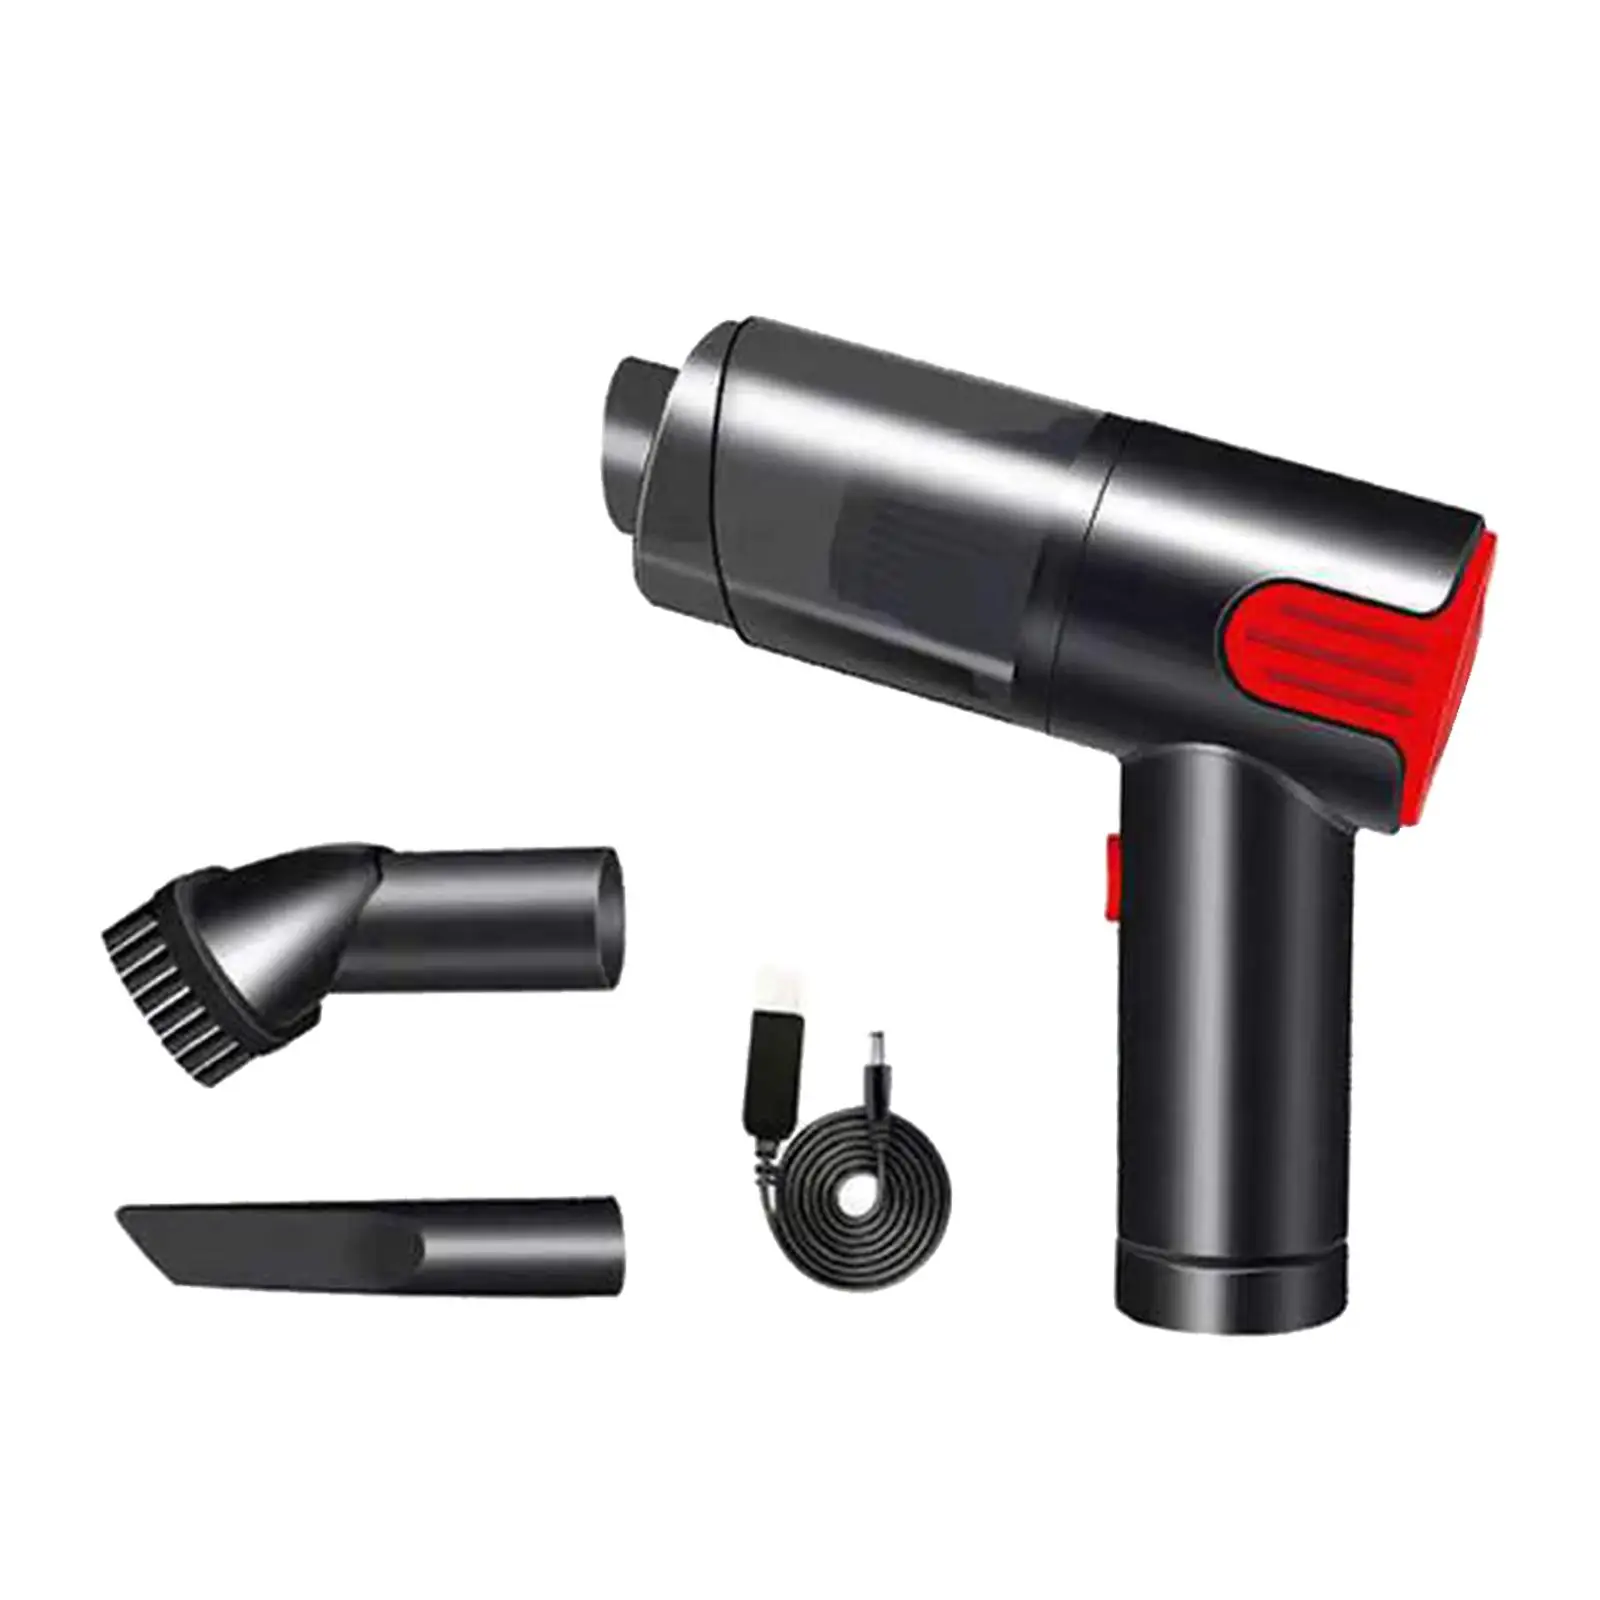 9Kpa Handheld Vacuum Cleaner with Attachments for Car Interior Cleaning